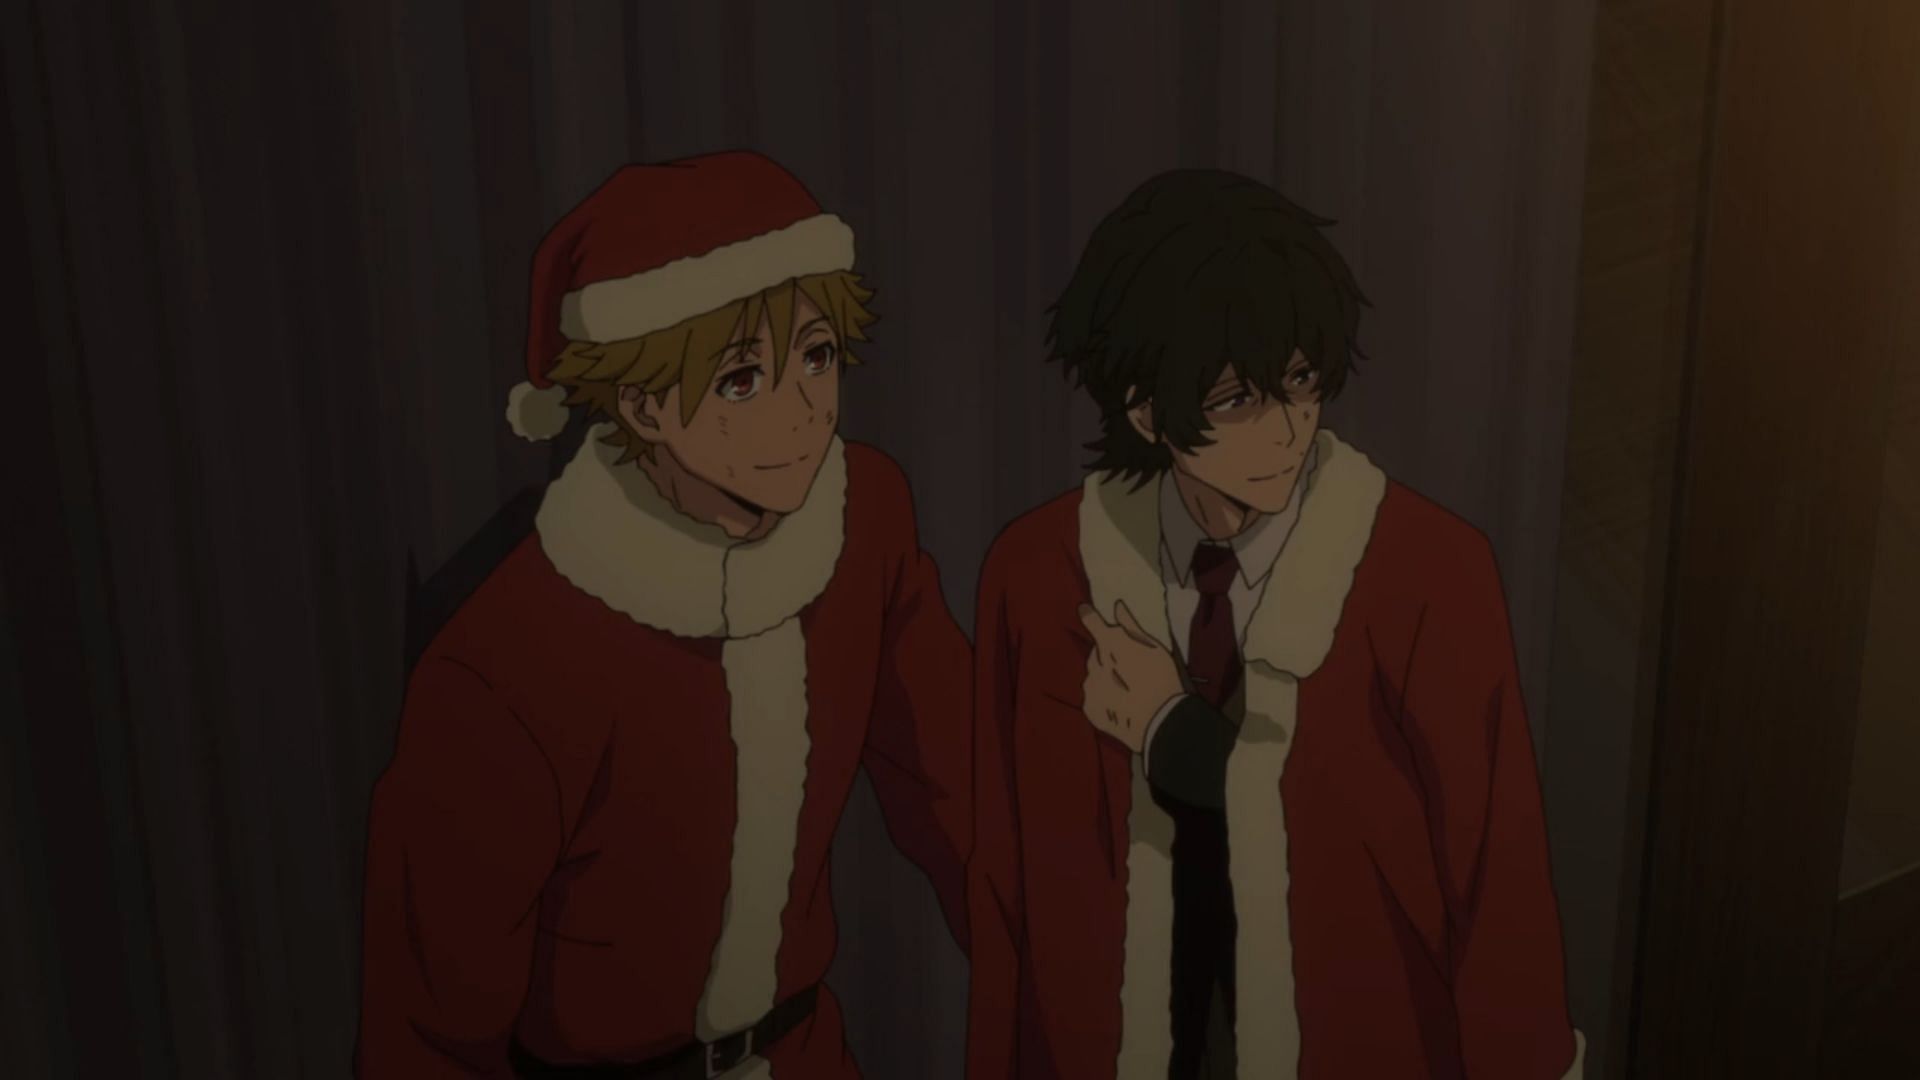 Kazuki and Rei dressed up as Santa to surprise Miri, as seen in Buddy Daddies episode 12 (Image via P.A. Works)